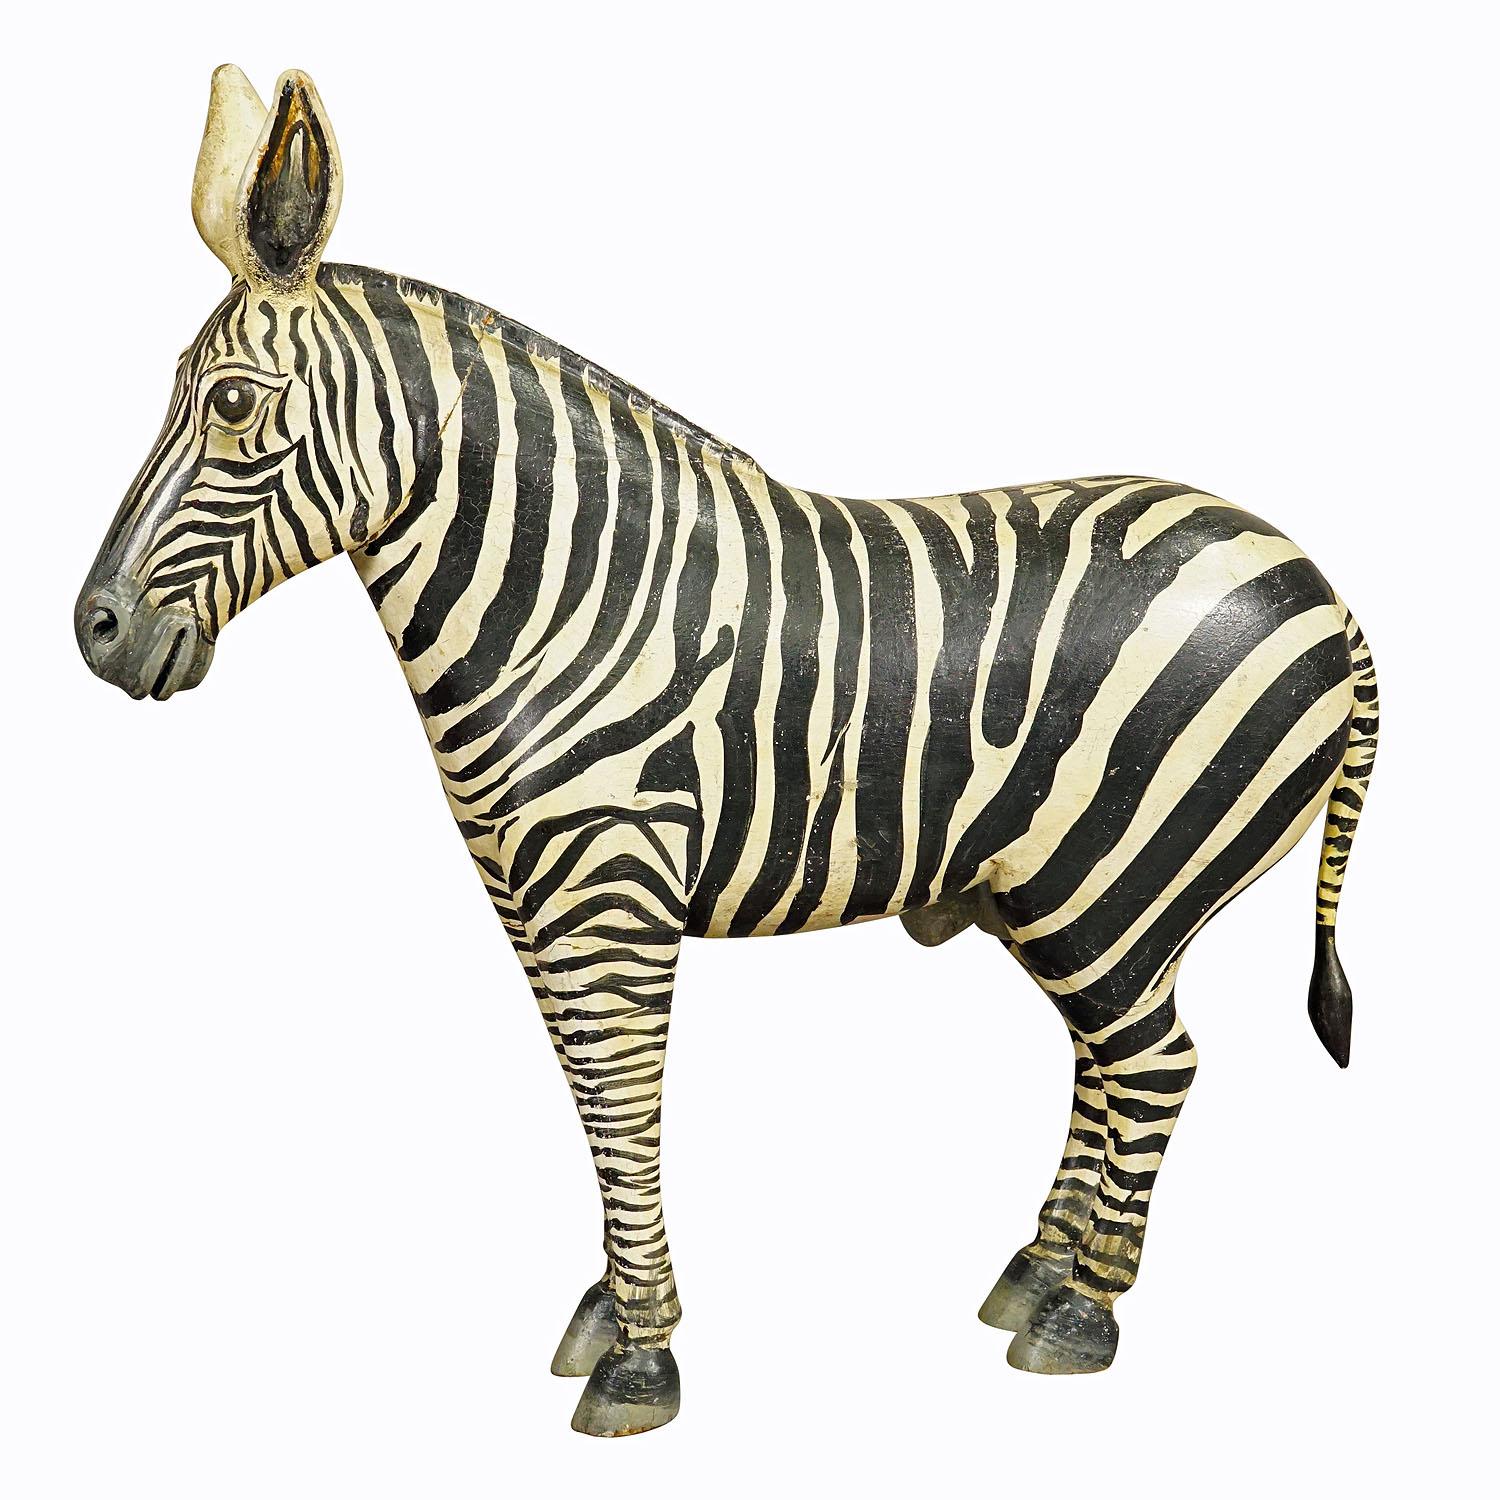 Wooden Carved Statue of a Zebra Handcarved in Germany ca. 1930s

An antique statue of a zebra. Made of wood, finely handcarved and handpainted with naturalistic details in Germany ca. 1930s. A very fancy home decoration. Good condition with minor